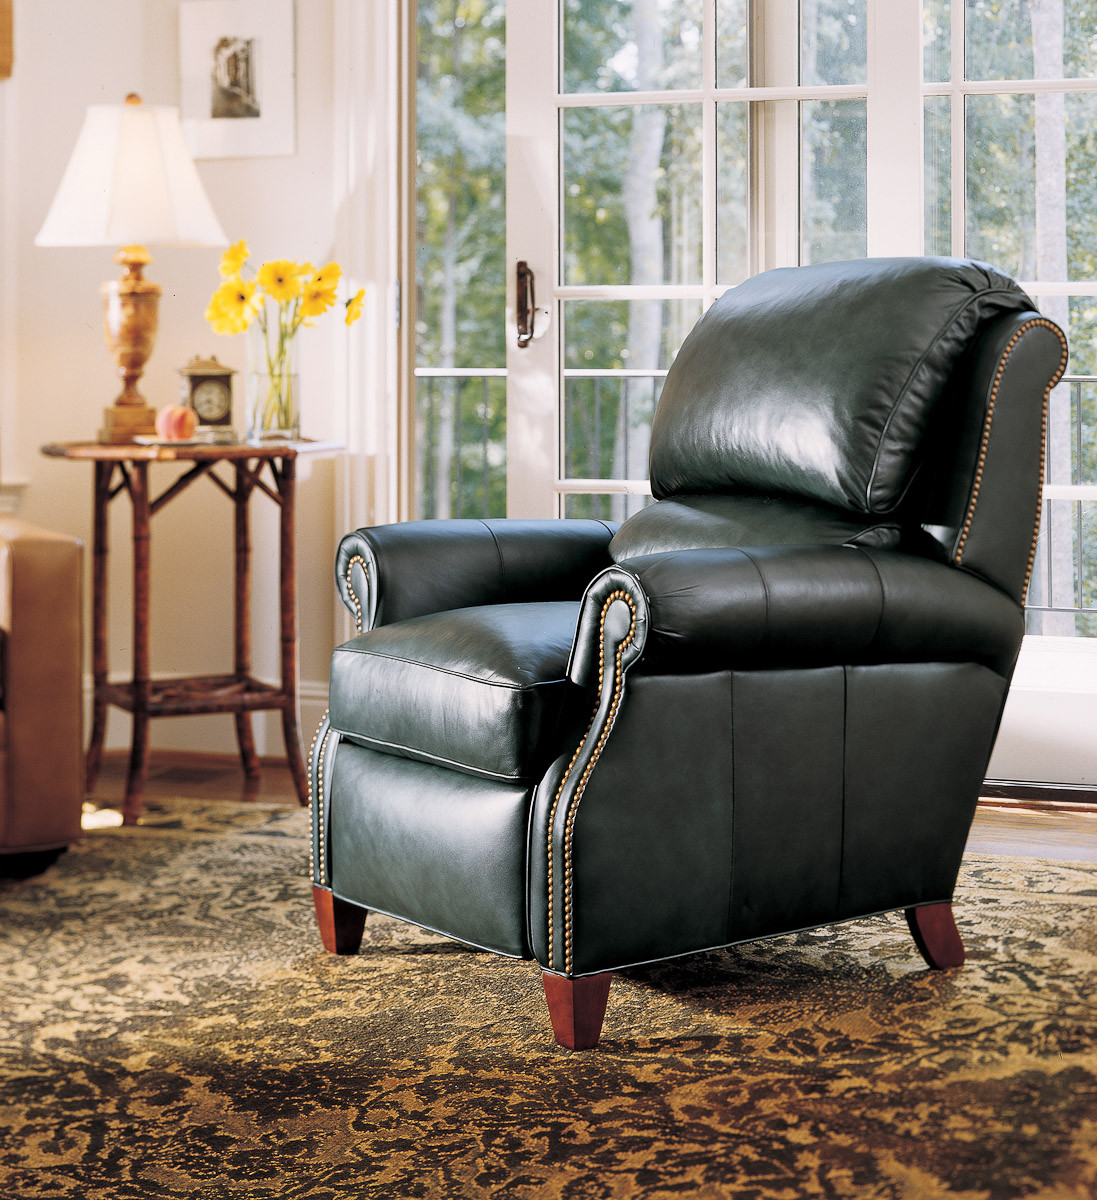 Living Room Recliner Chair
 Living Room Leather Furniture